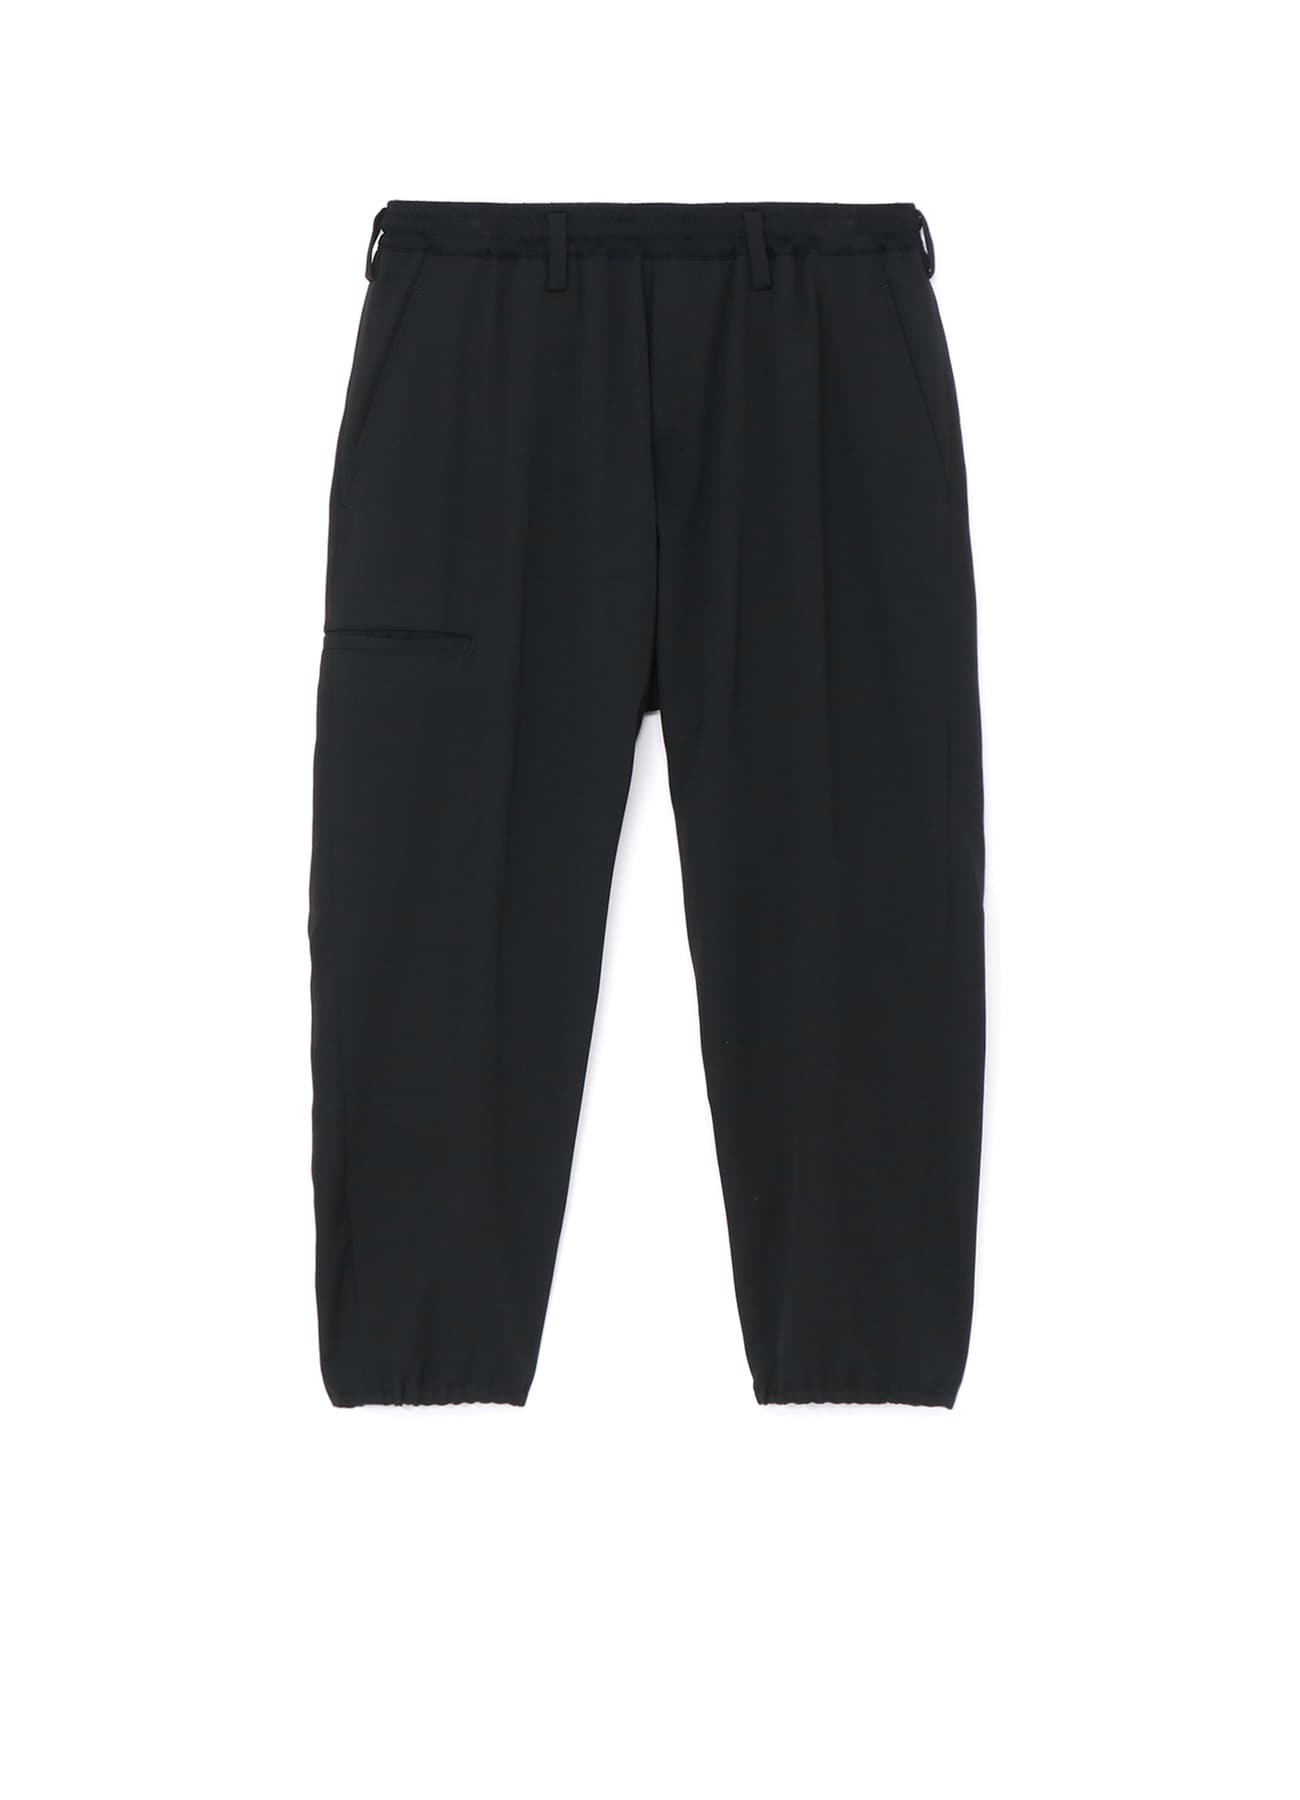 WOOL GABARDINE PANTS WITH PIPING DETAILS